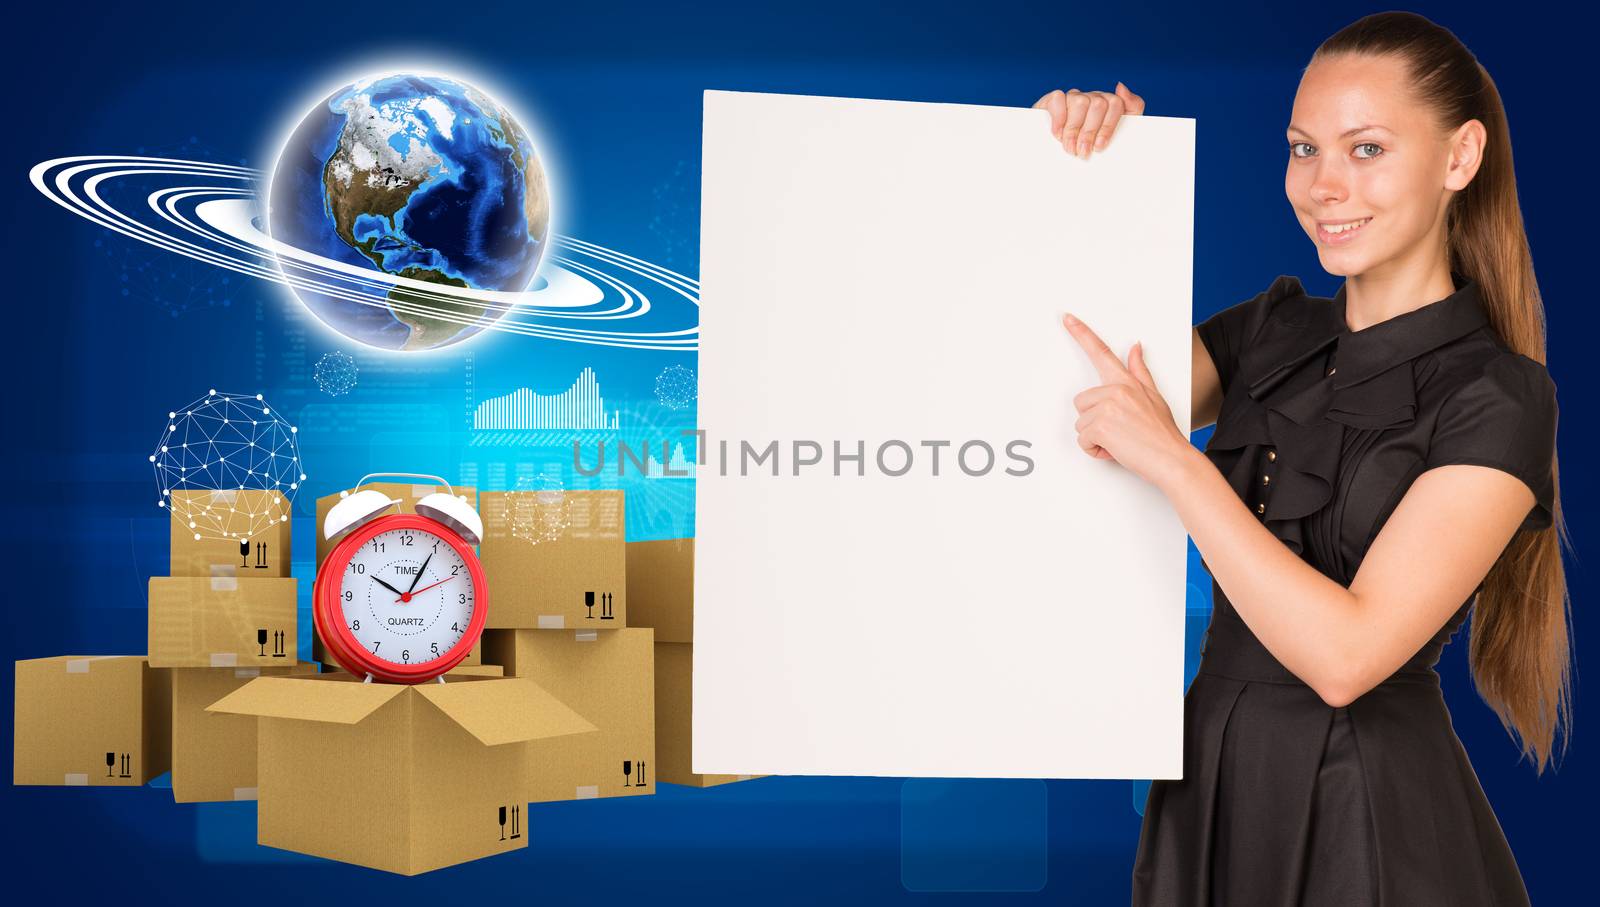 Businesswoman hold paper sheet. Earth and heap of cardboard boxes with alarm clock as backdrop. Element of this image furnished by NASA